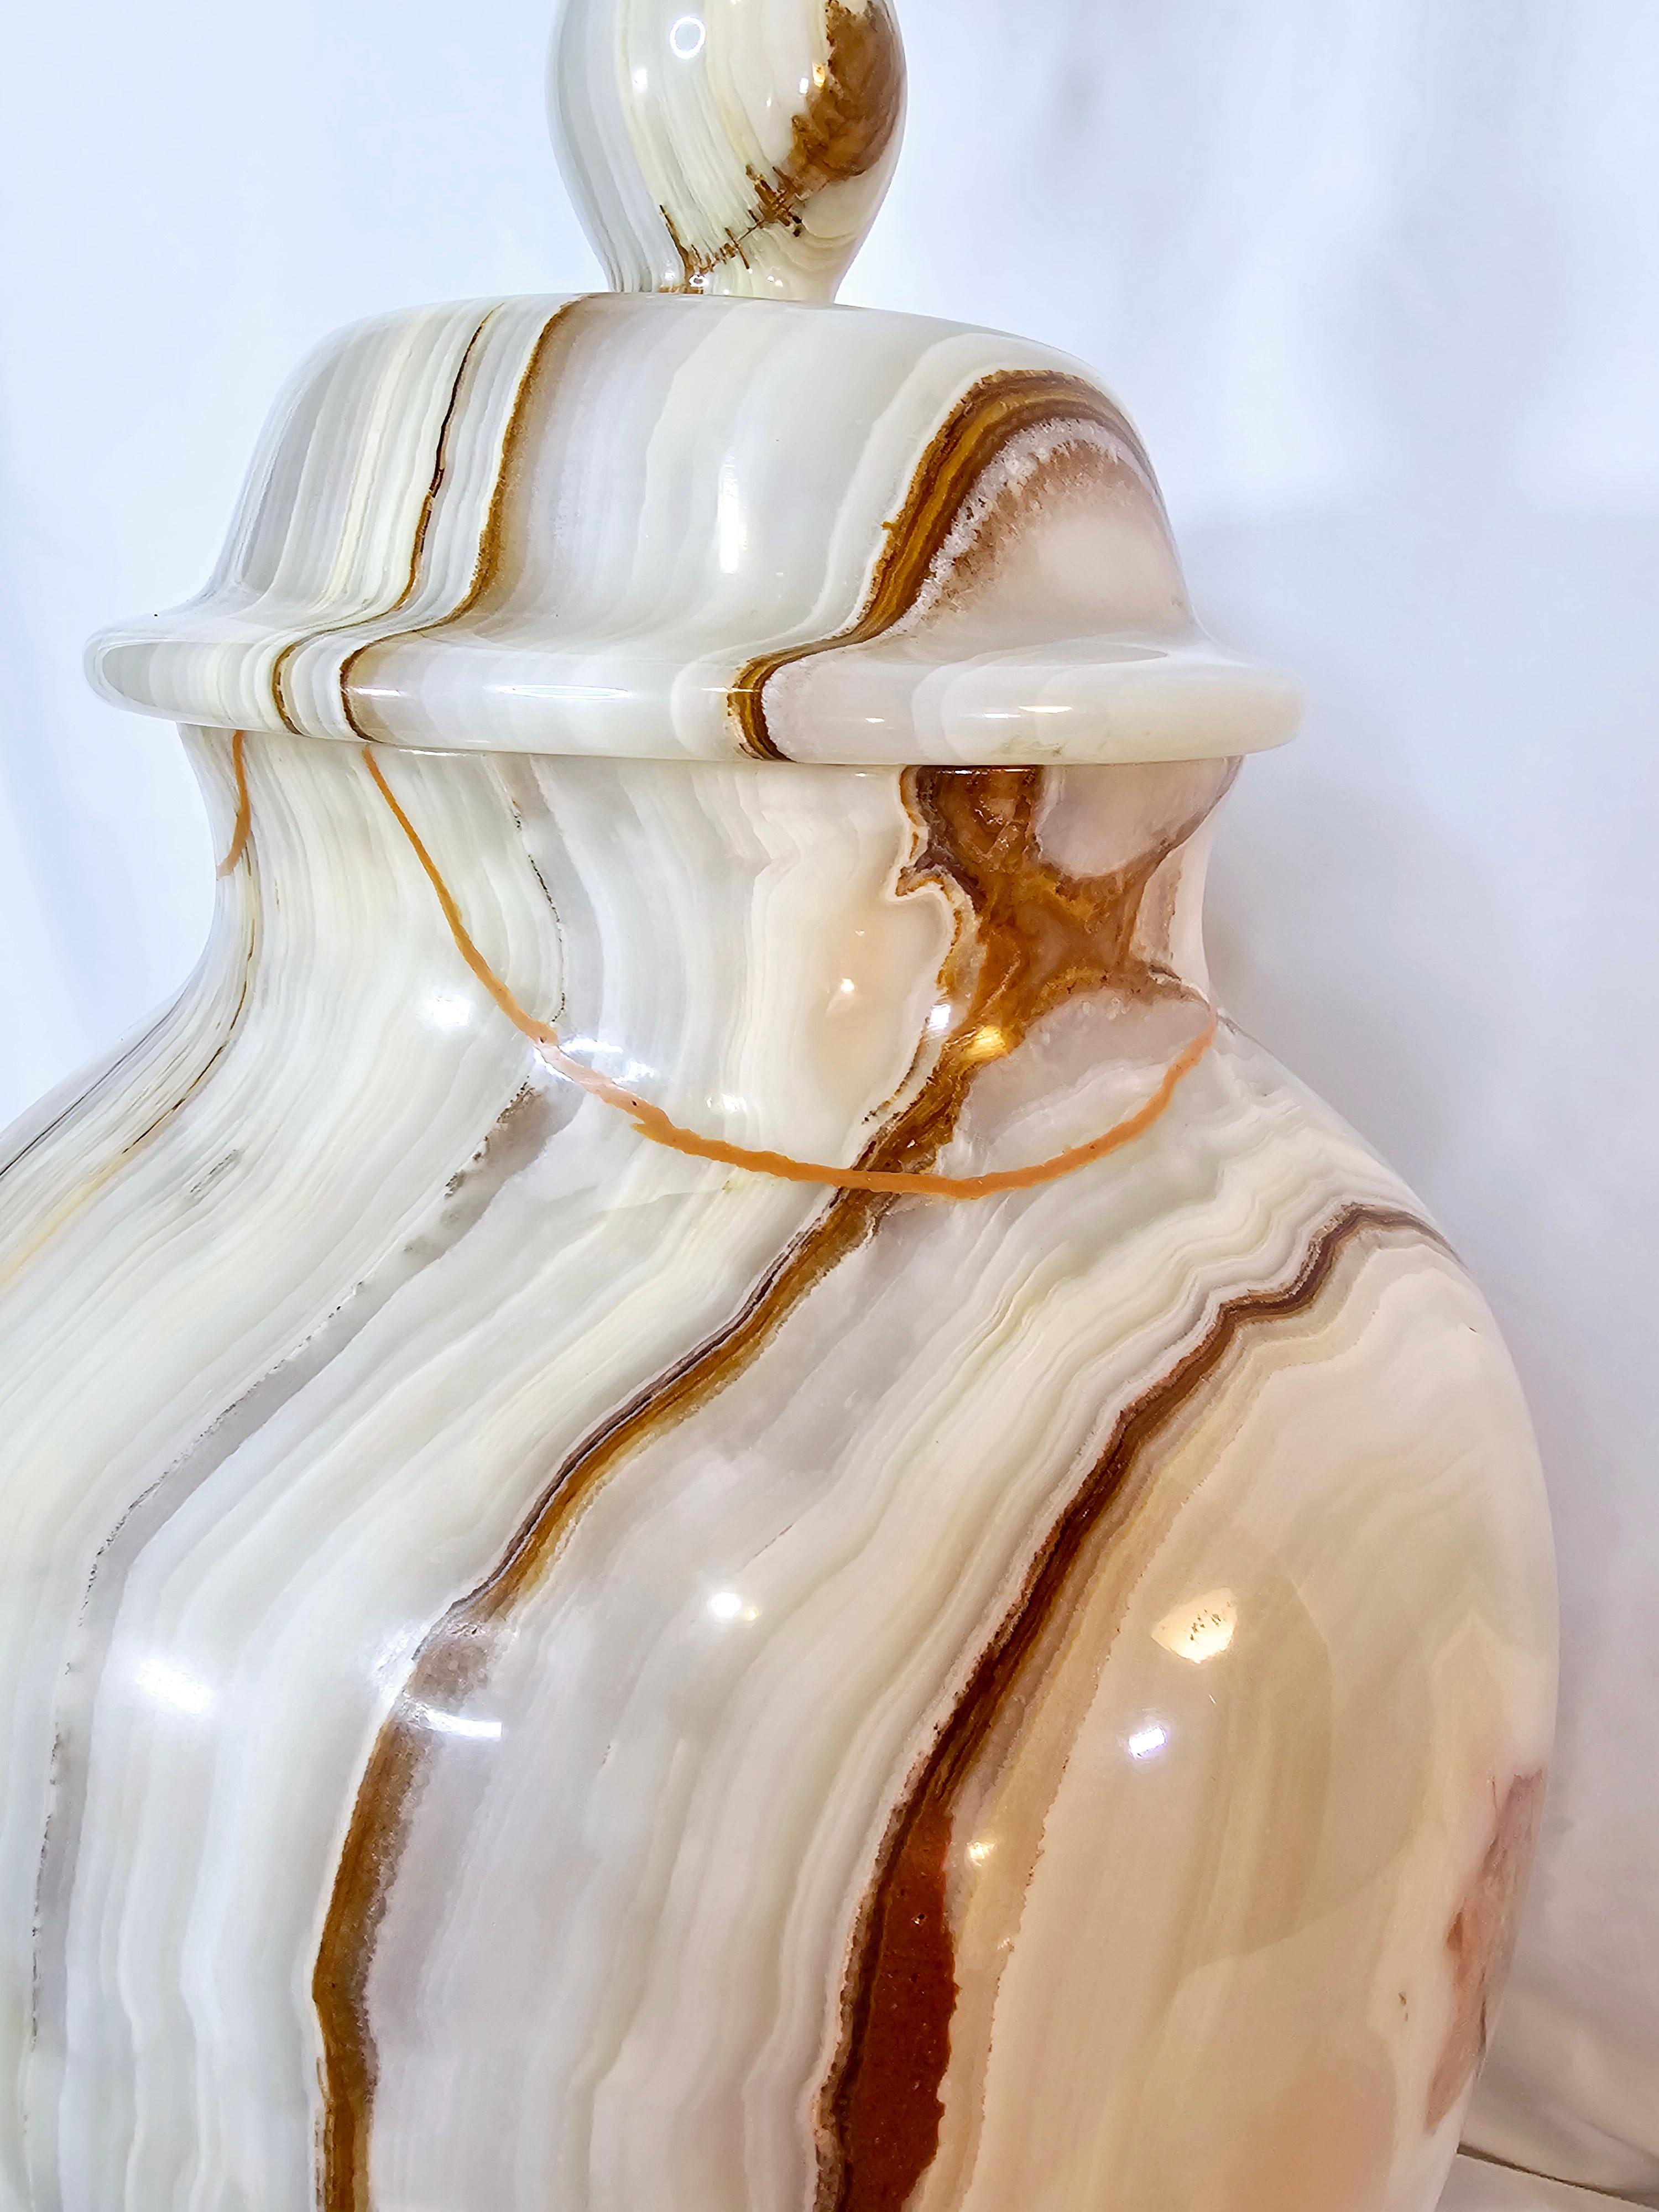 Gorgeous, vintage, heavy Hollywood regency white onyx lamp.
Carved out of a single piece of onyx.
Looks different from every angle. 
Heavily detailed brass base.
Like a piece of jewelry for a table.
Original cord and finial.
Adds some richness and